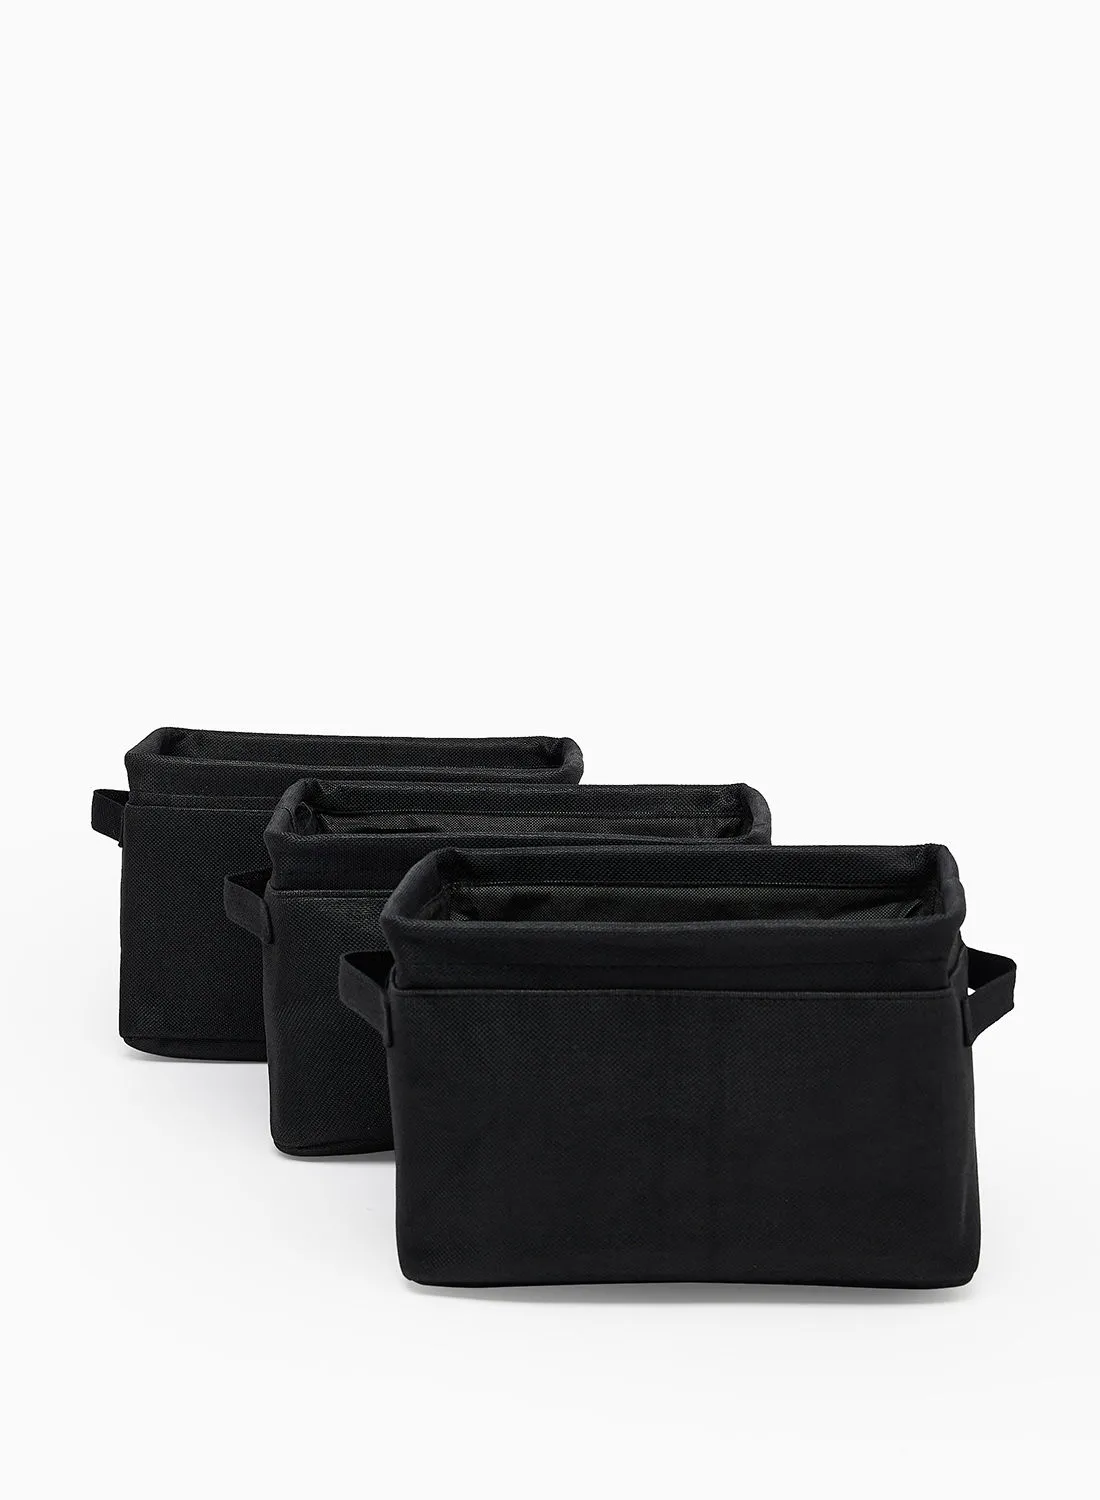 Amal 3 Pack Linen Storage Organiser With Side Handles Easy To Collapse From The Top, Handy For Closet And Dresser Organisation Black 30X20 X20cm